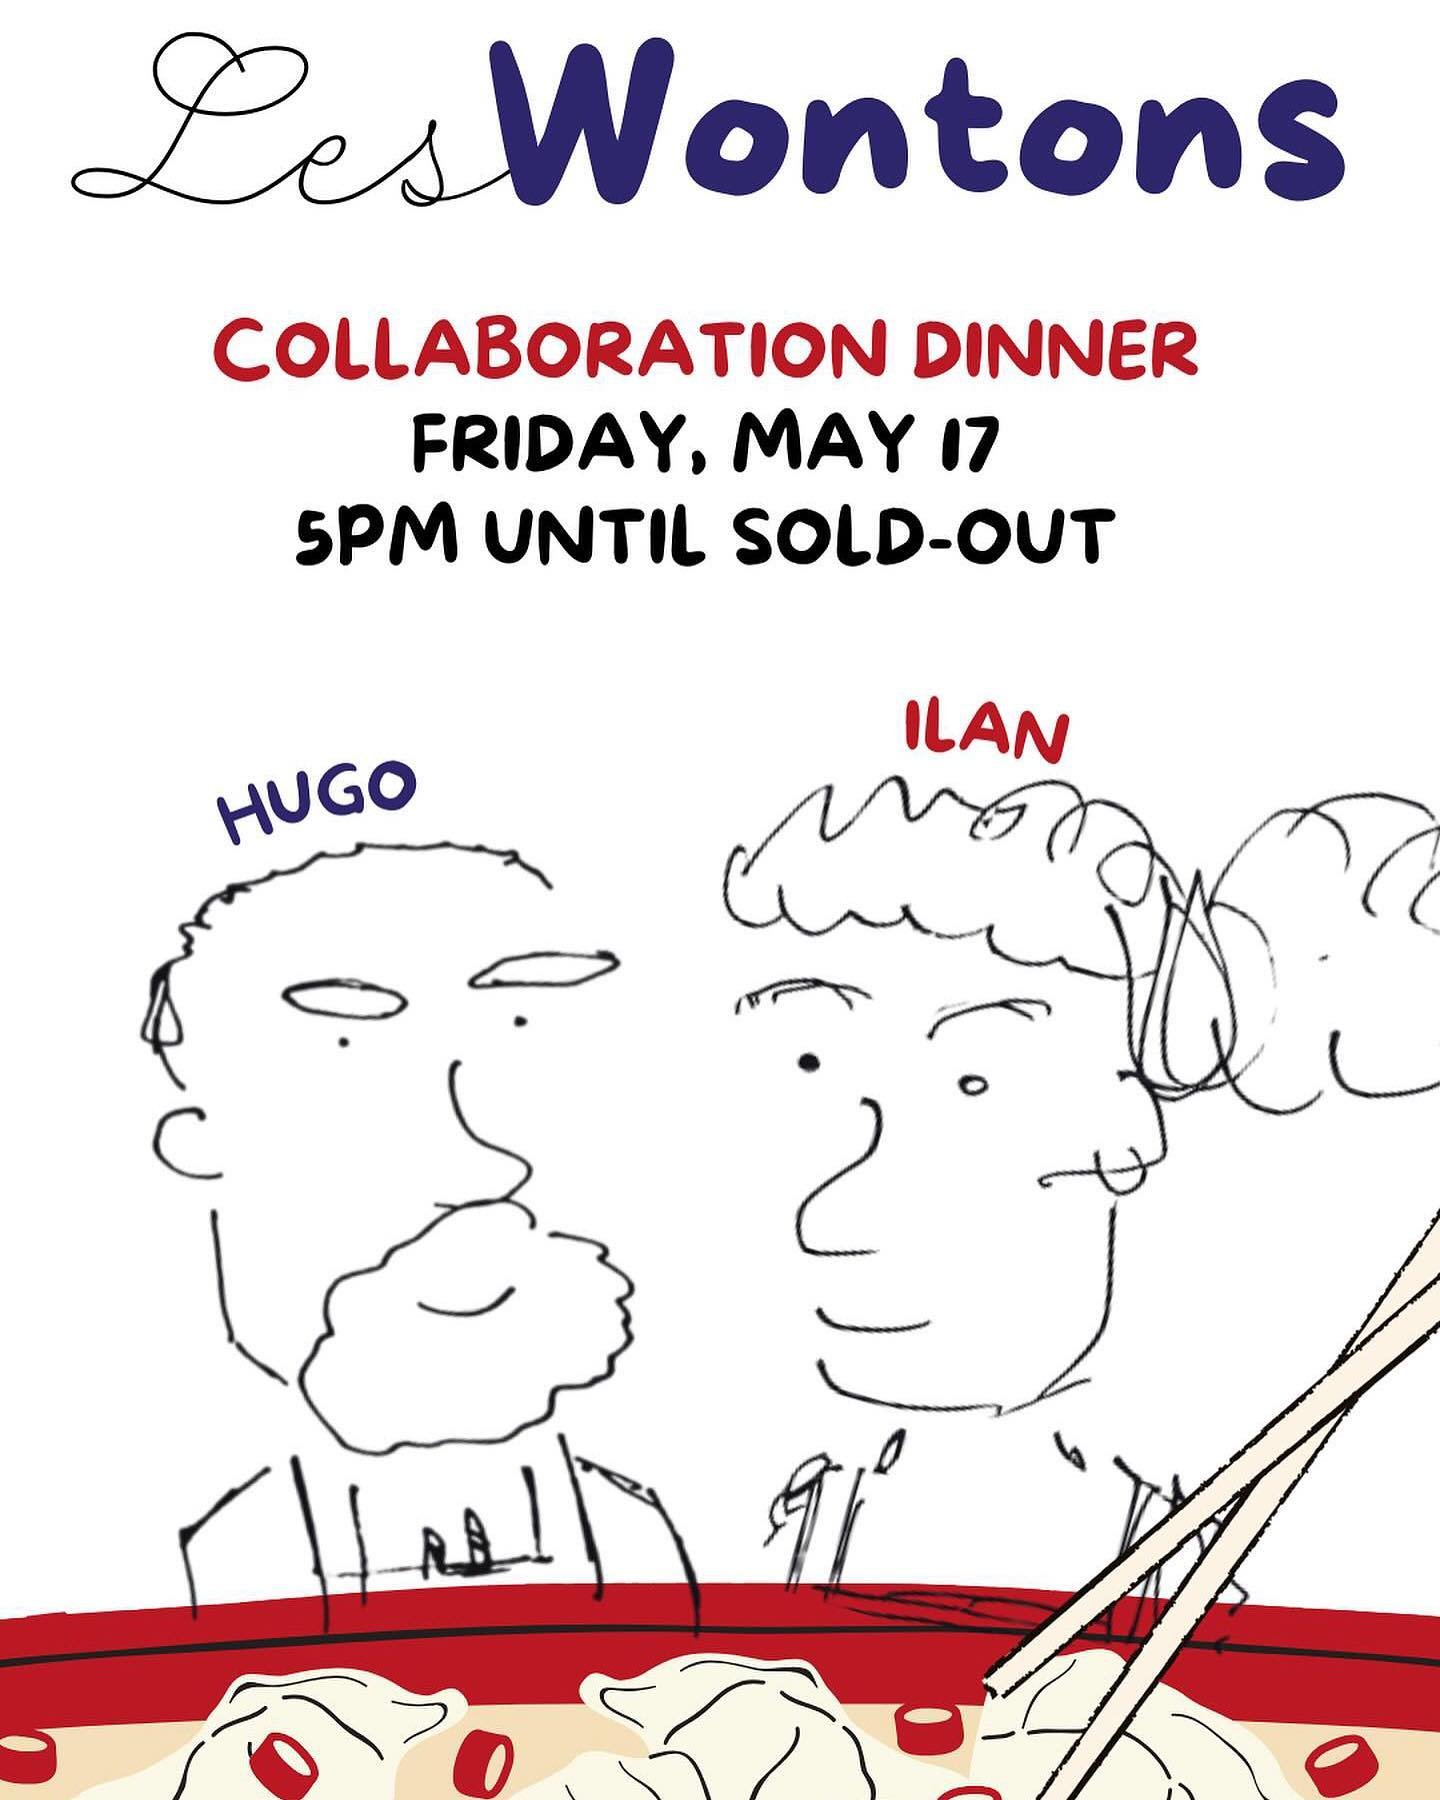 This Friday we are thrilled to collaborate with Chef Hugo Delaune on a very fun Chinese Tea House influenced pop-up. From 5pm-9pm or until we run out 

🧧🥡🥢 swipe right for menu 🥟🎊🍵

Come check us out for something different this Friday!